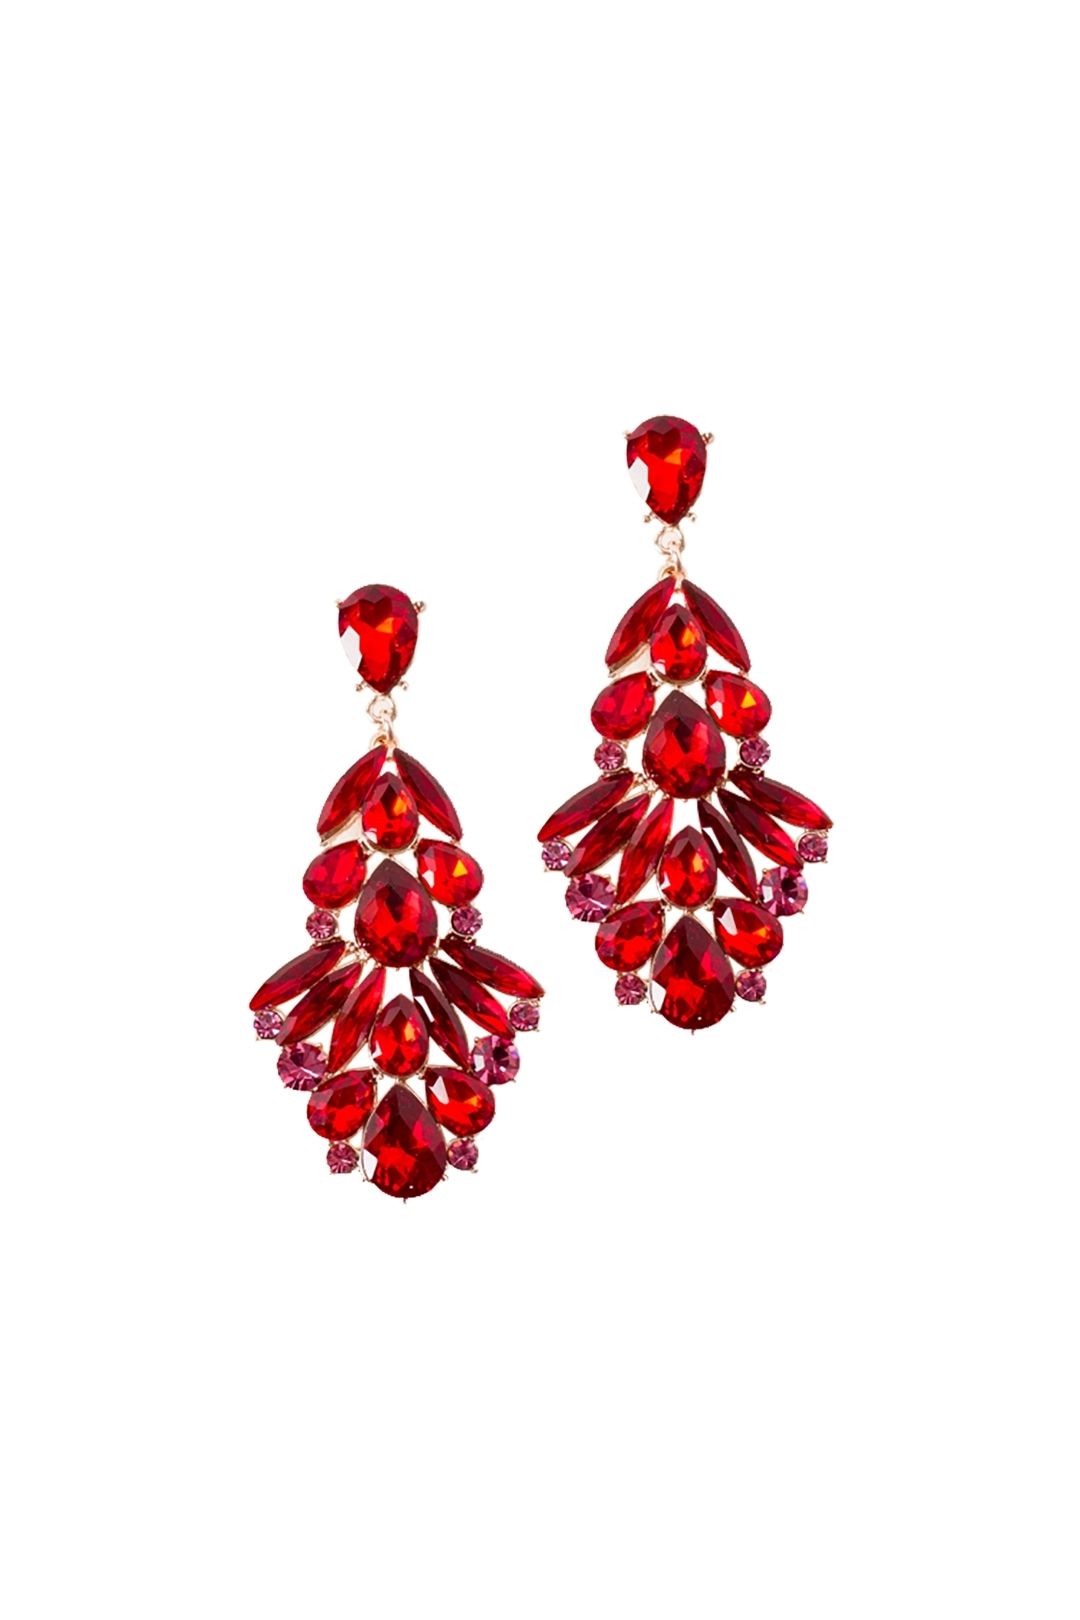 Adorne - Statement Jewel Drop Earring - Red Rose - Front